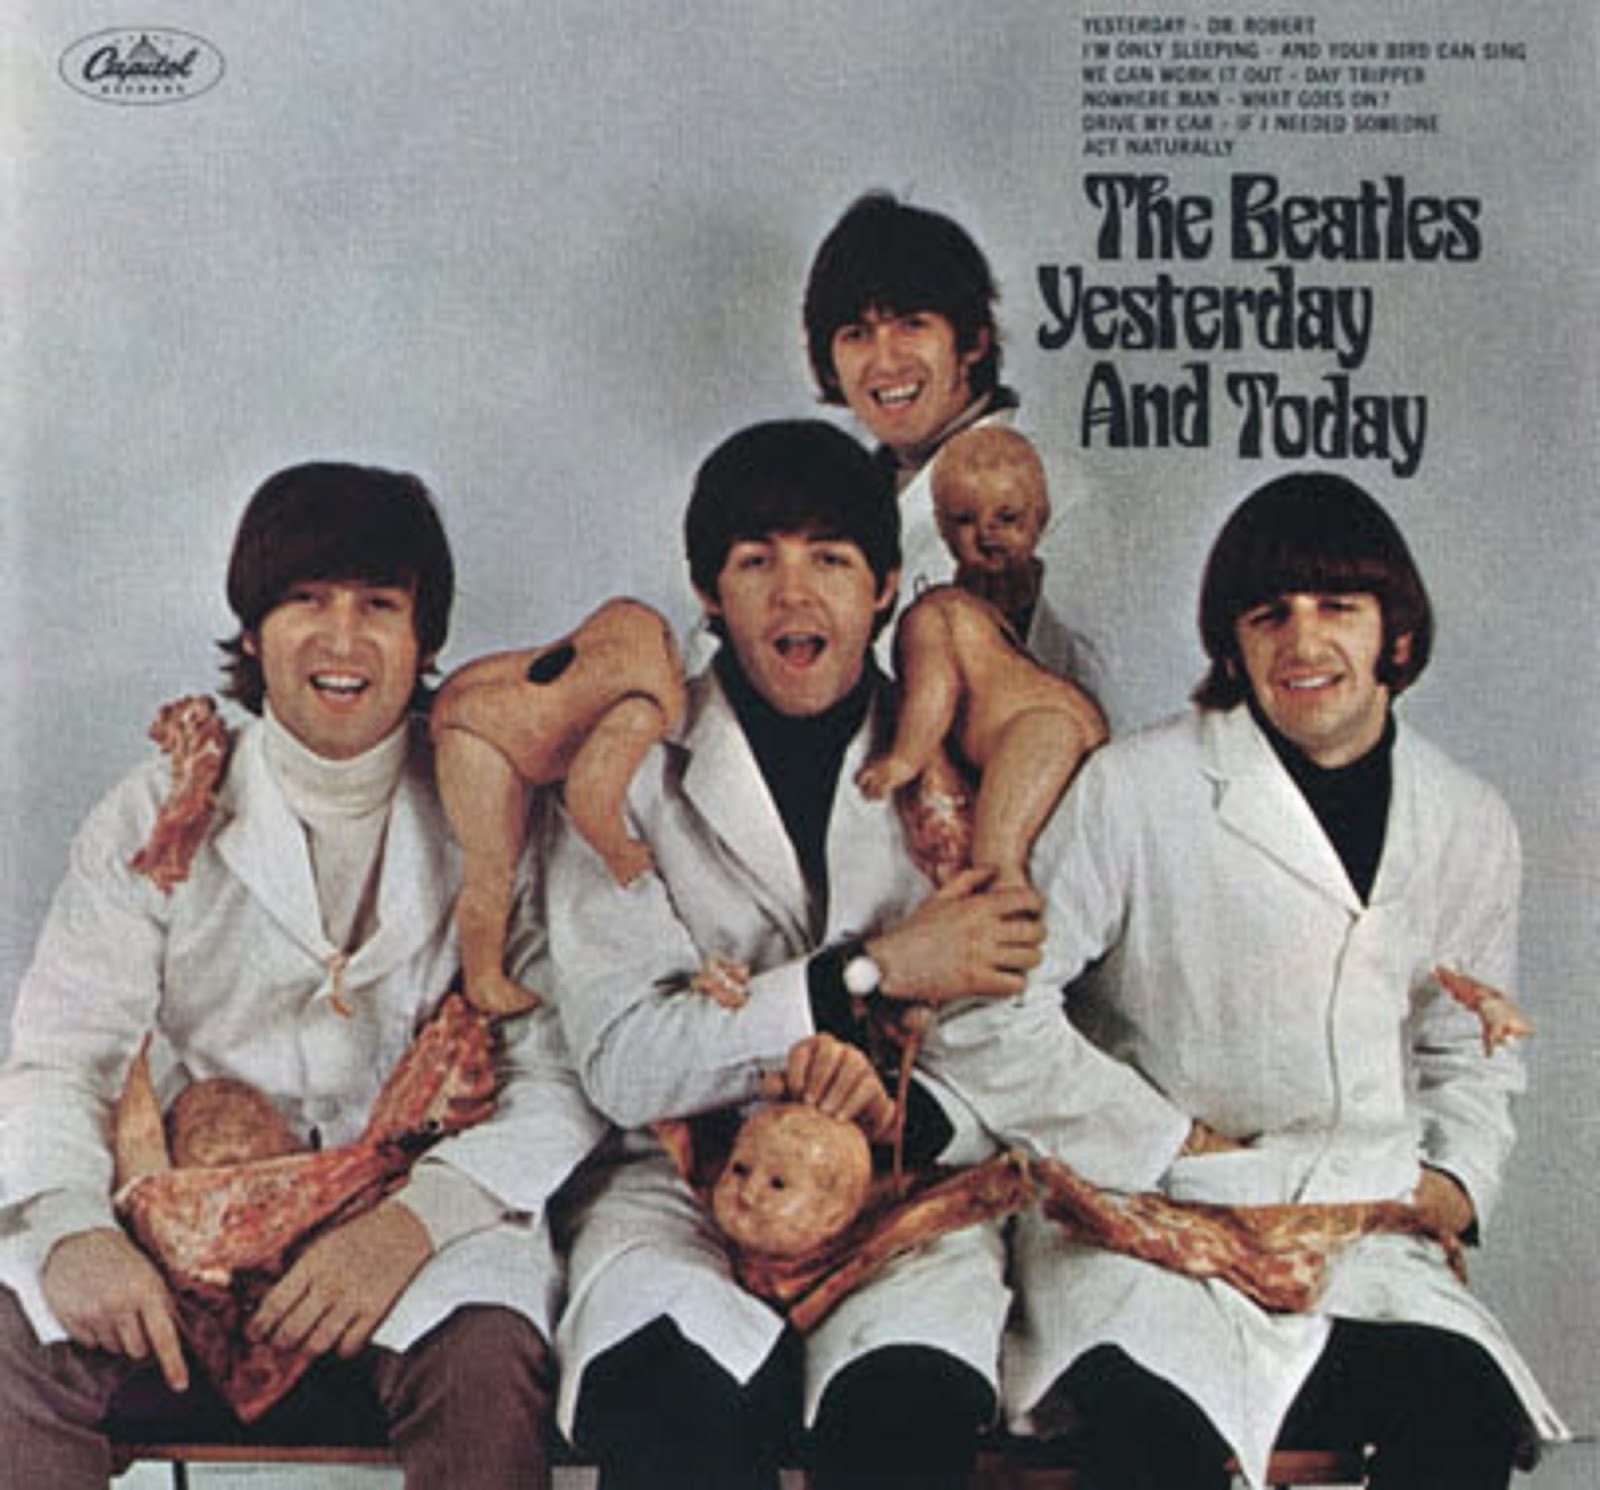 "THE BEATLES BUTCHER ALBUM"  - A MASS PUBLIC RECALL ON THE FIRST DAY OF RELEASE.